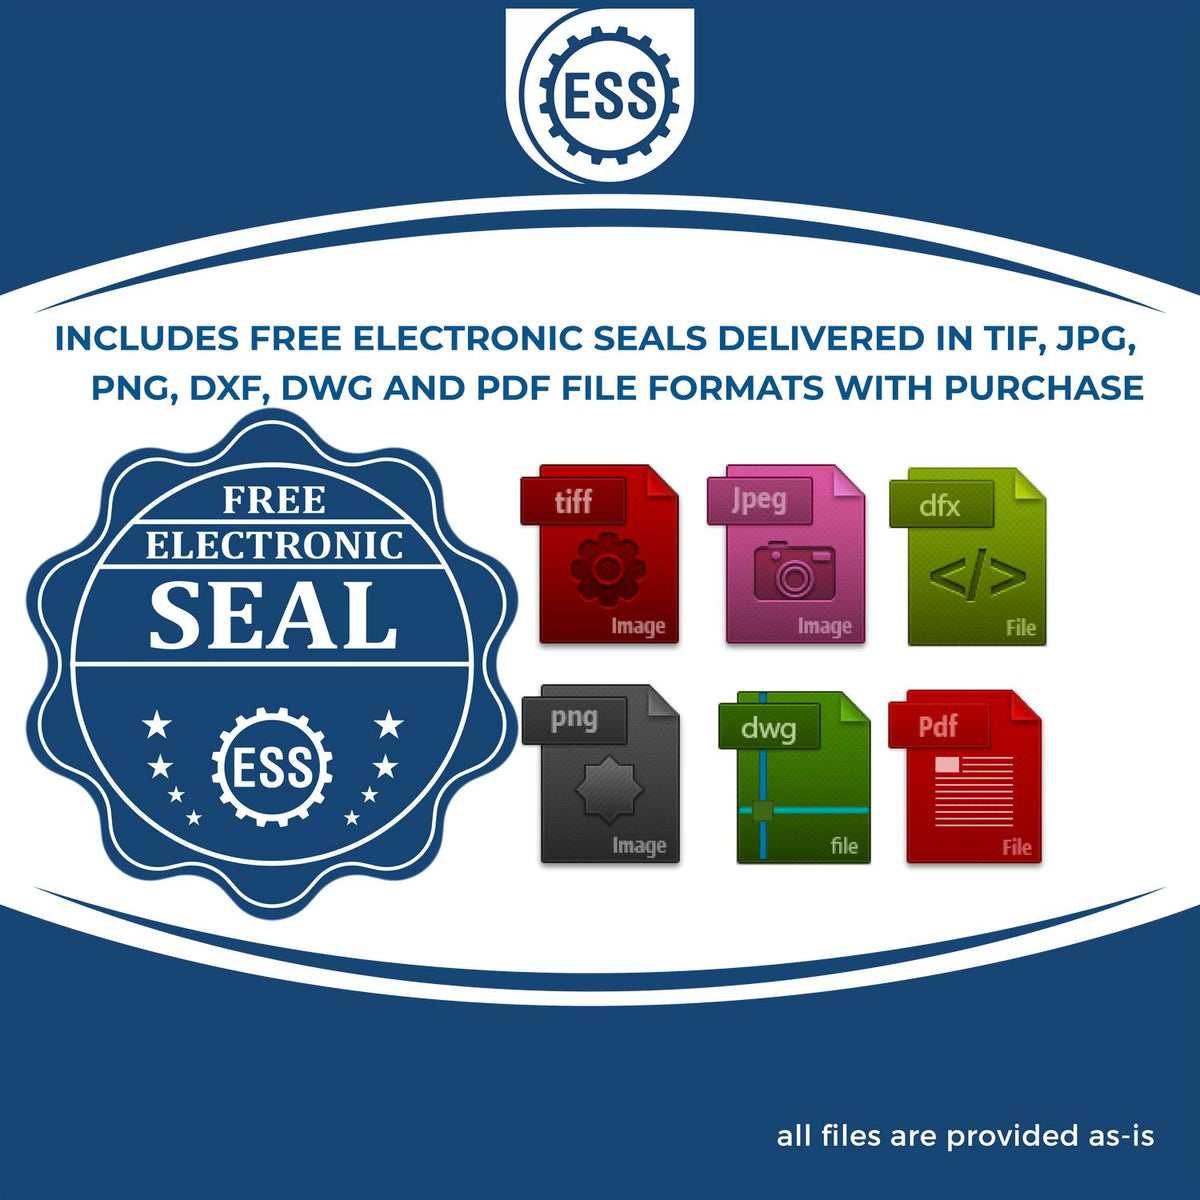 An infographic for the free electronic seal for the Self-Inking Tennessee Landscape Architect Stamp illustrating the different file type icons such as DXF, DWG, TIF, JPG and PNG.